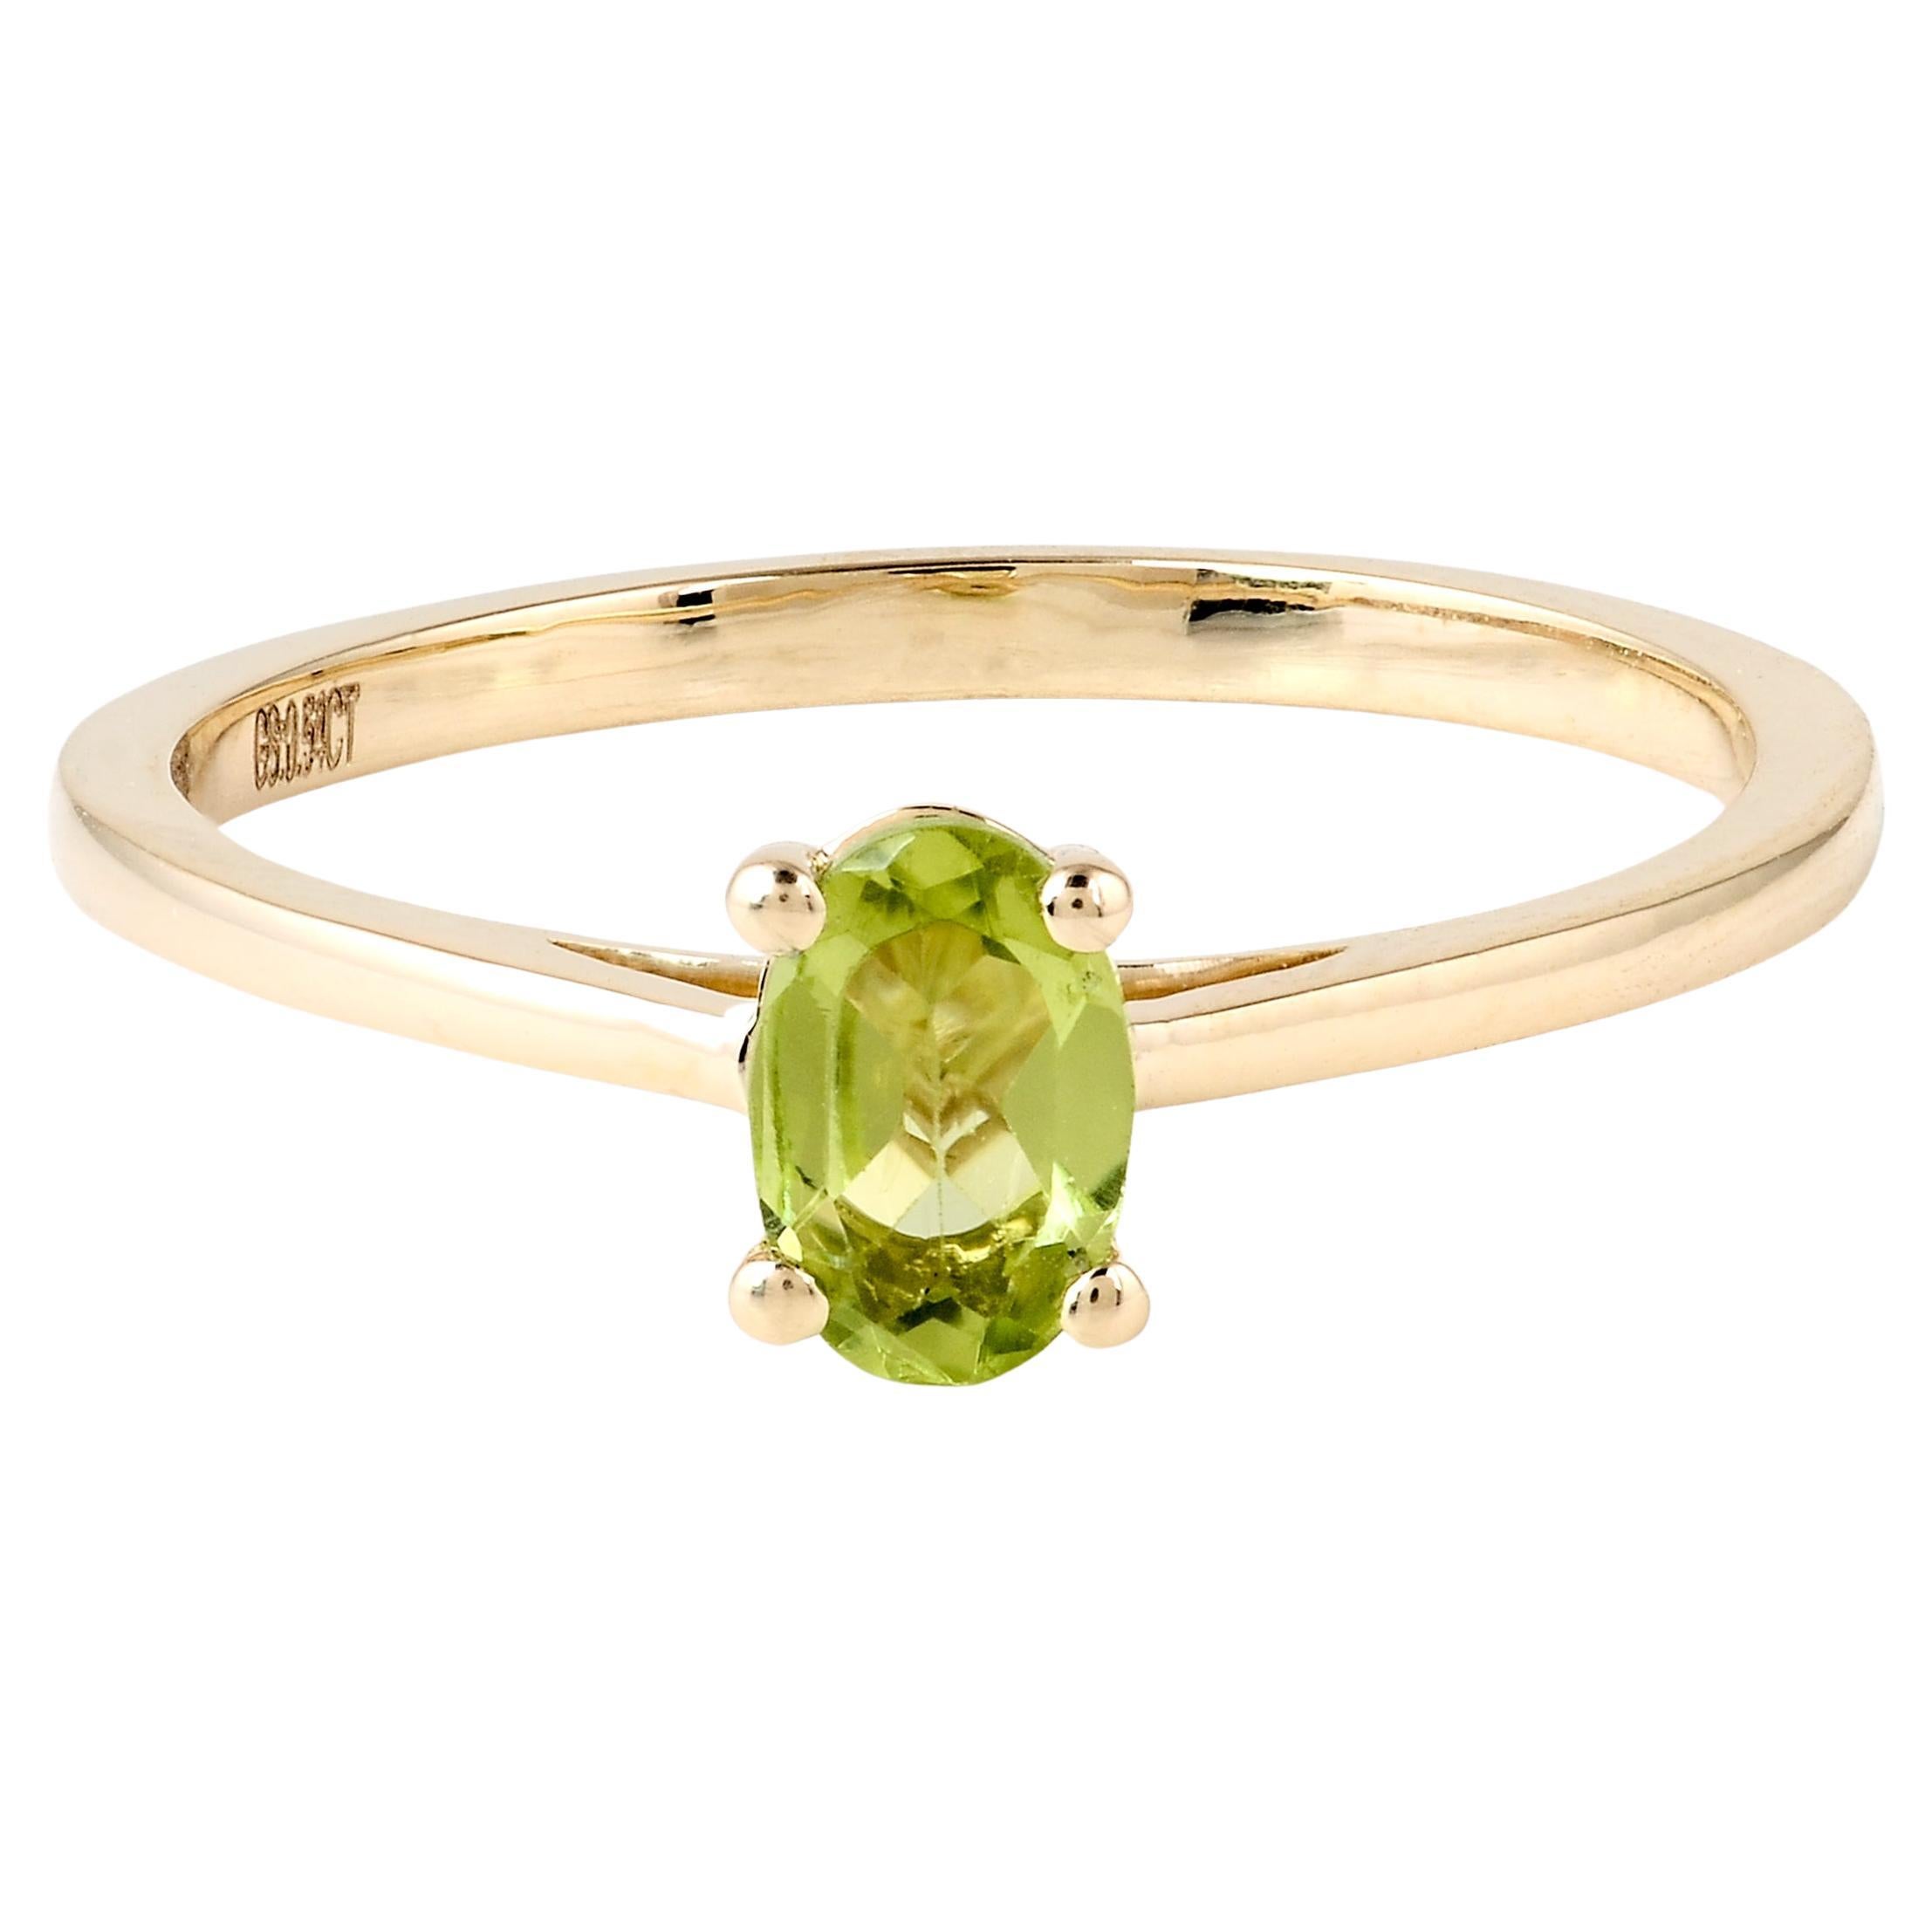 Chic 14K Peridot Cocktail Ring, Size 6.75 - Luxurious Statement Jewelry Piece For Sale